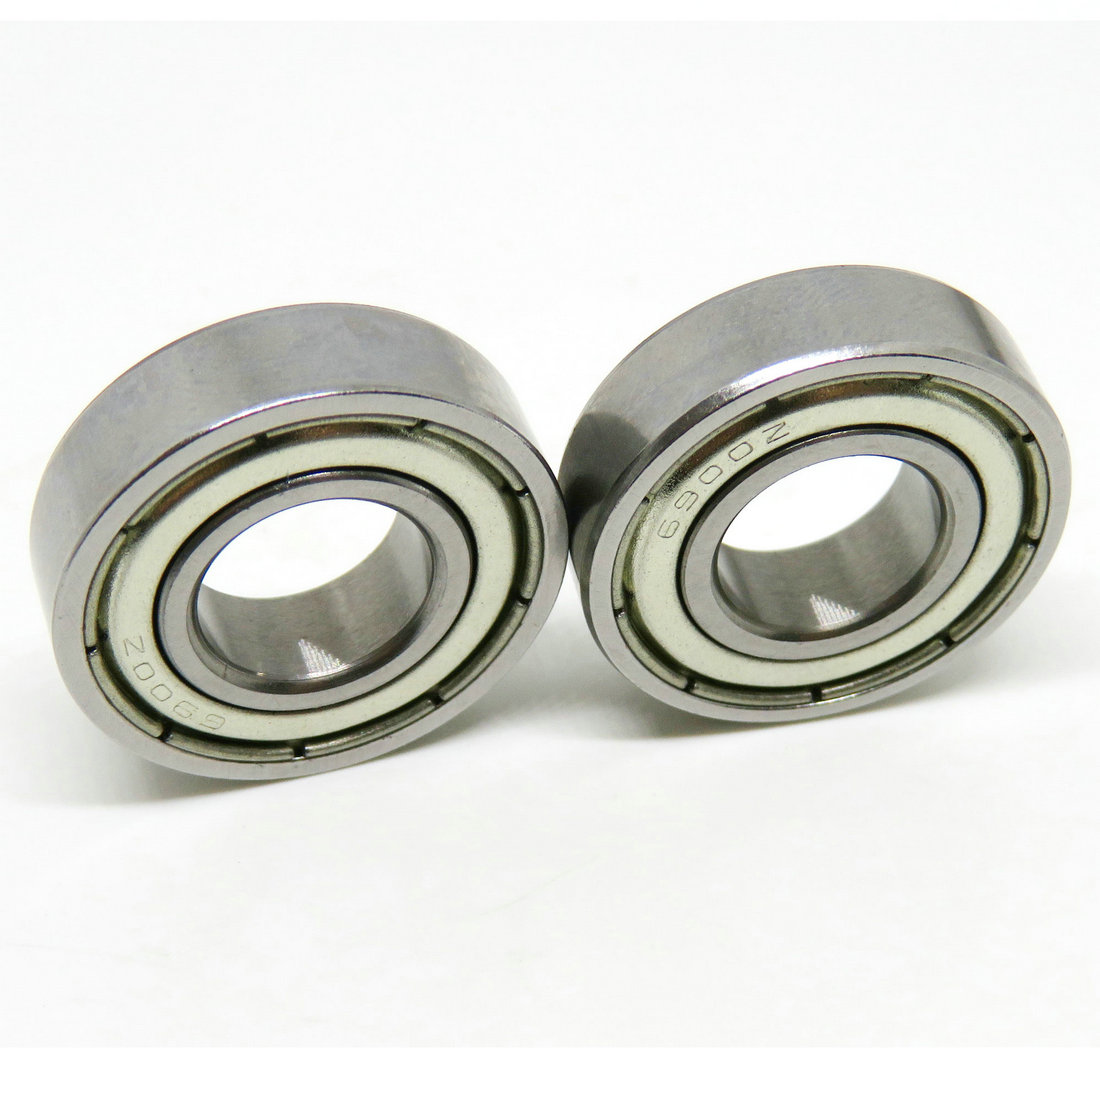 Thin section ball bearings 6900zz groove shielded wall bearing 10x22x6 6900 ZZ for scooter wheel.jpg